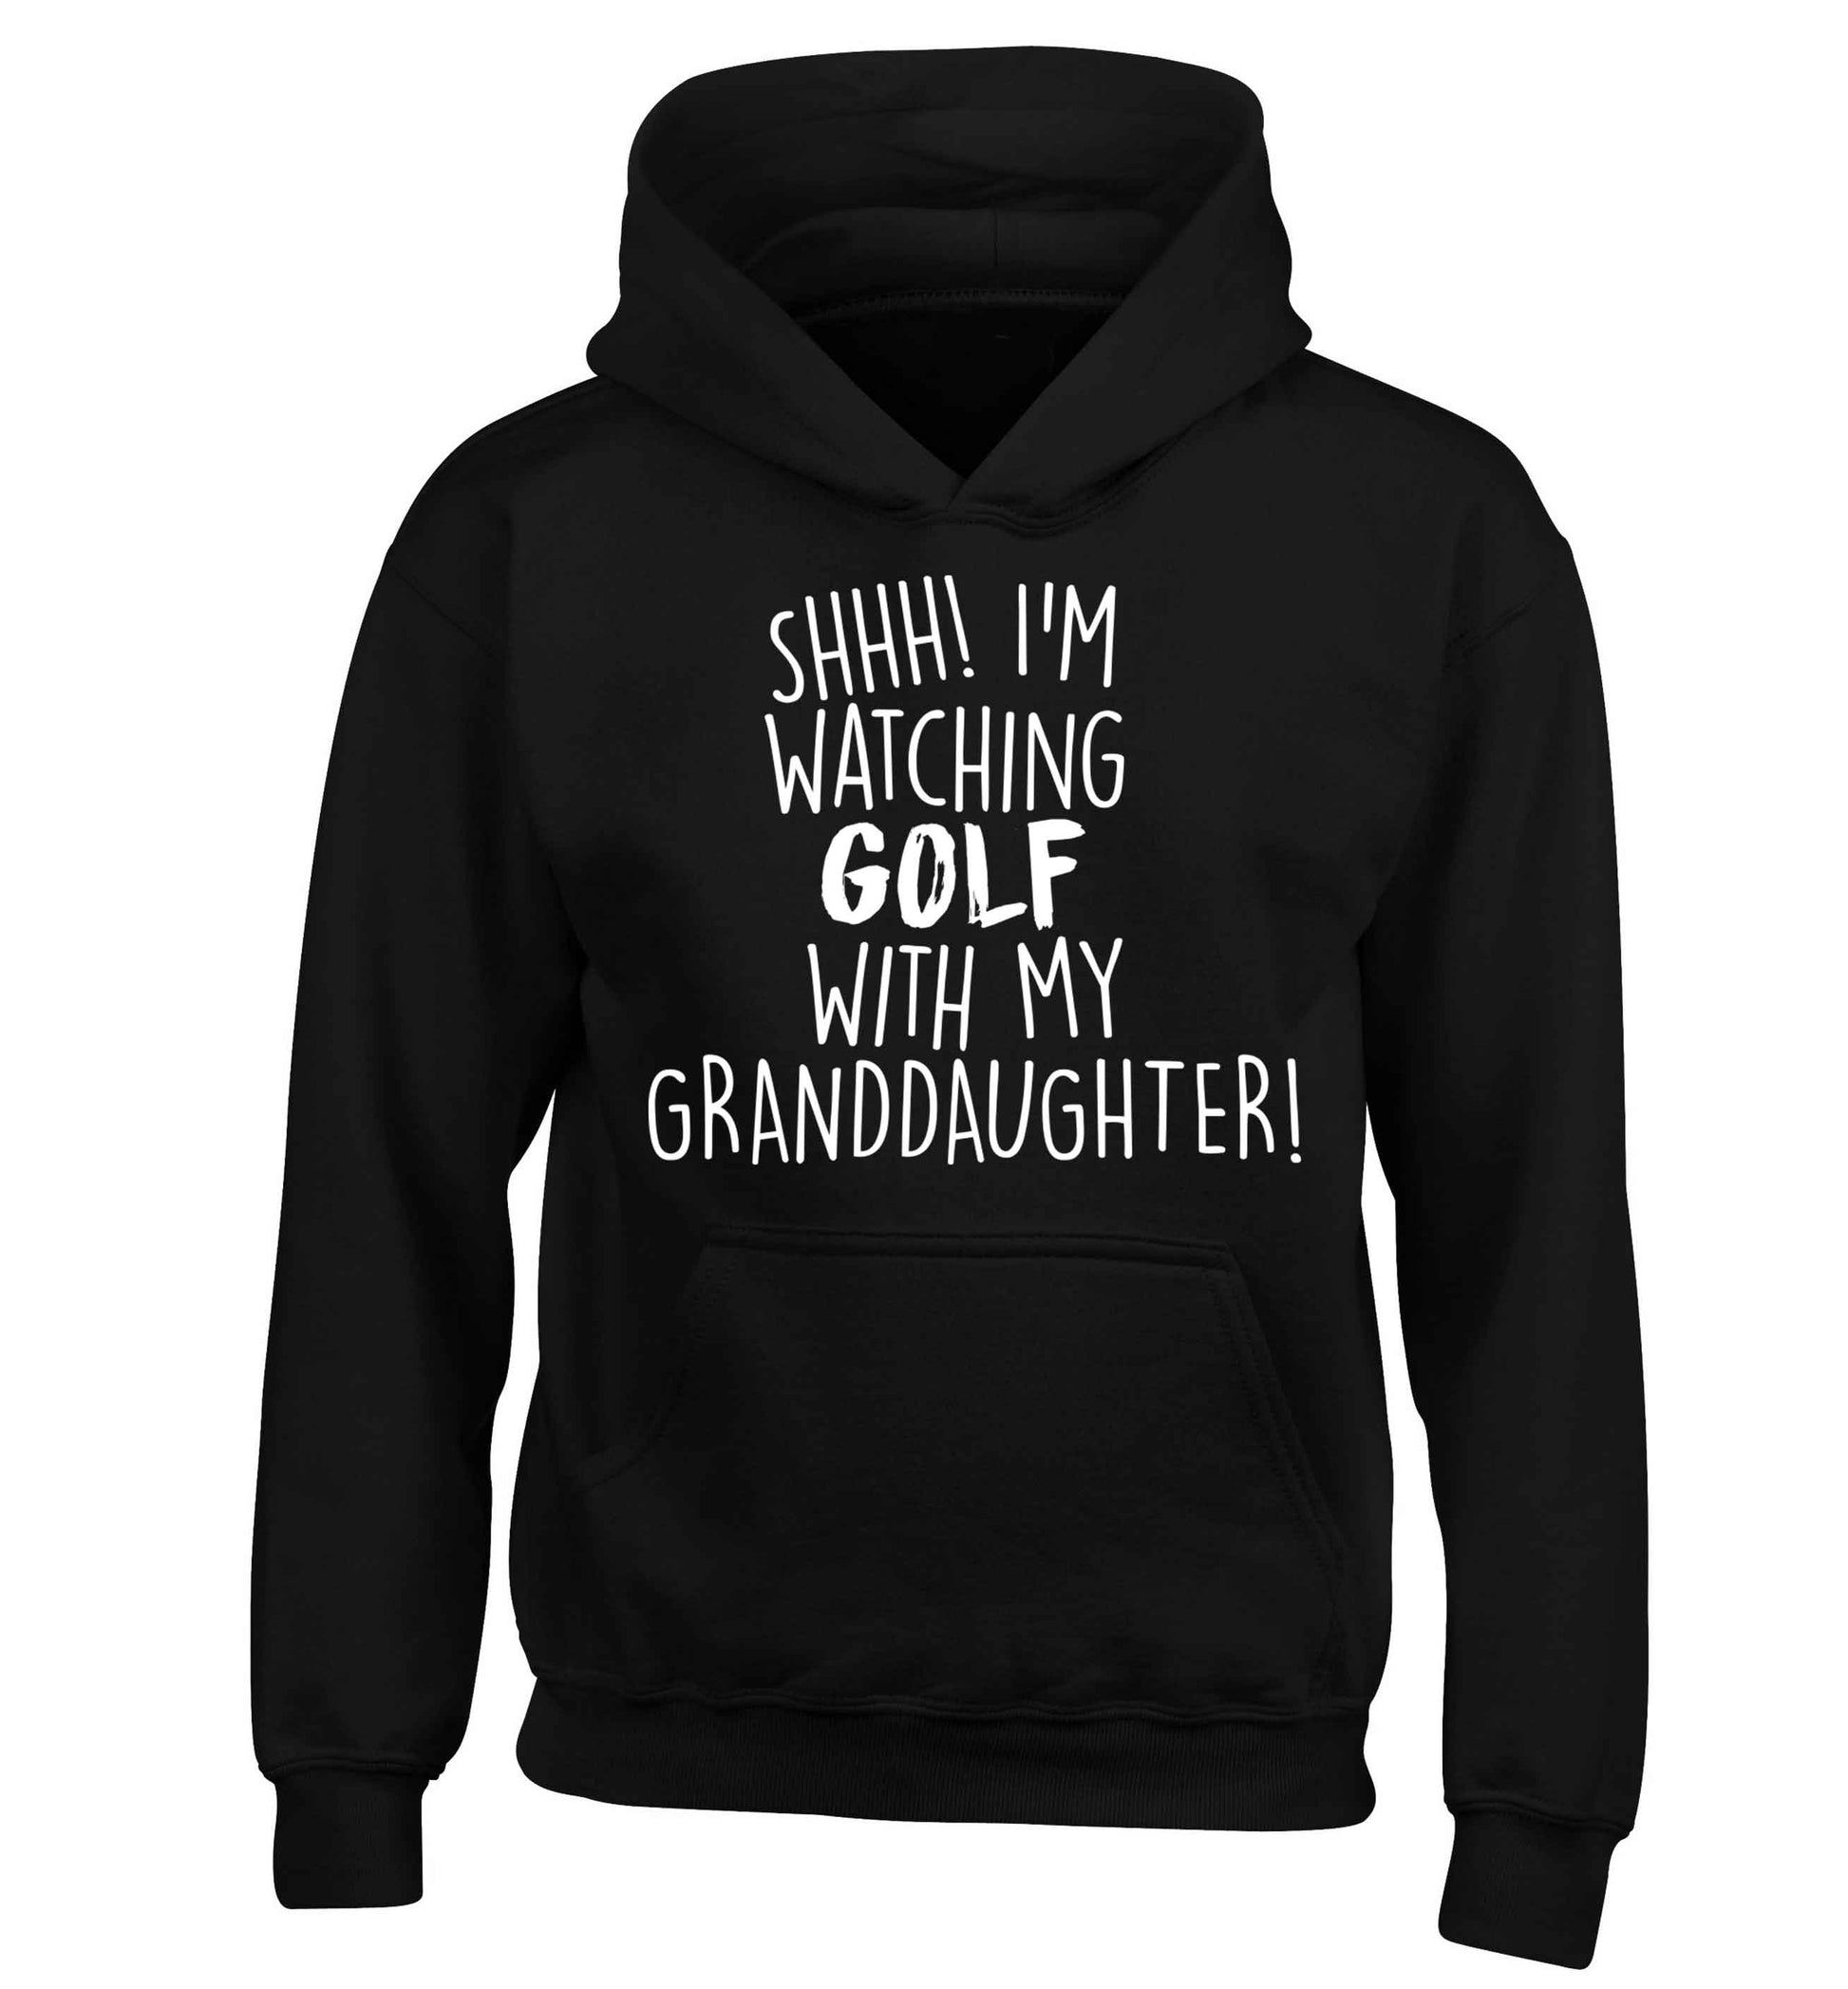 Shh I'm watching golf with my granddaughter children's black hoodie 12-13 Years